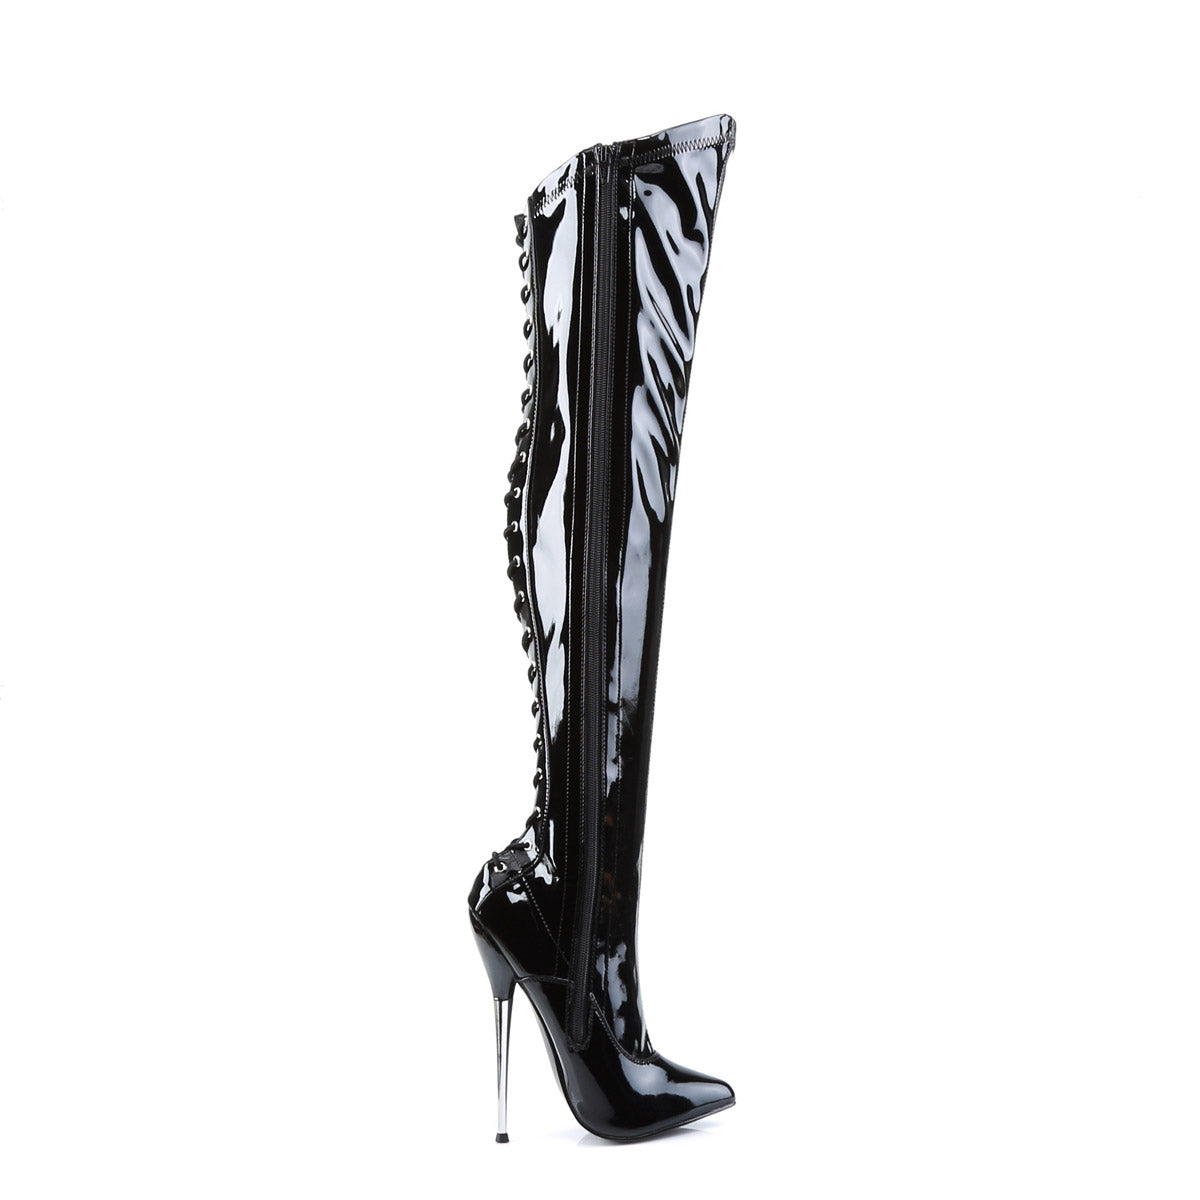 Lace Point Toe Zip Side Stiletto Heel Stretch Thigh High Boots Shoes Pleaser Devious DAGGER/3060